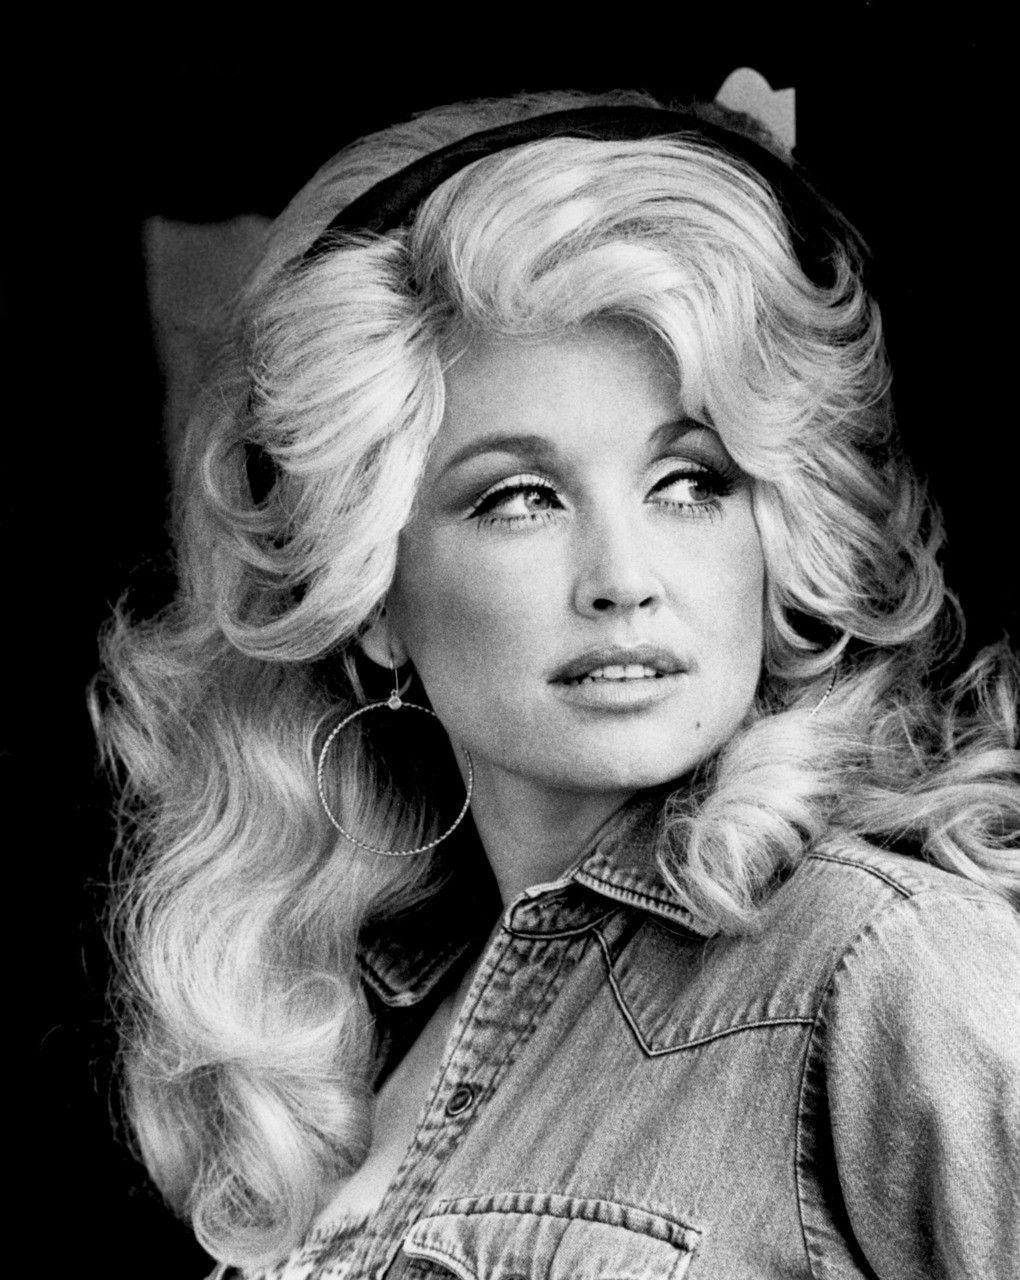 Dolly Parton Image & Wallpaper on Jeweell